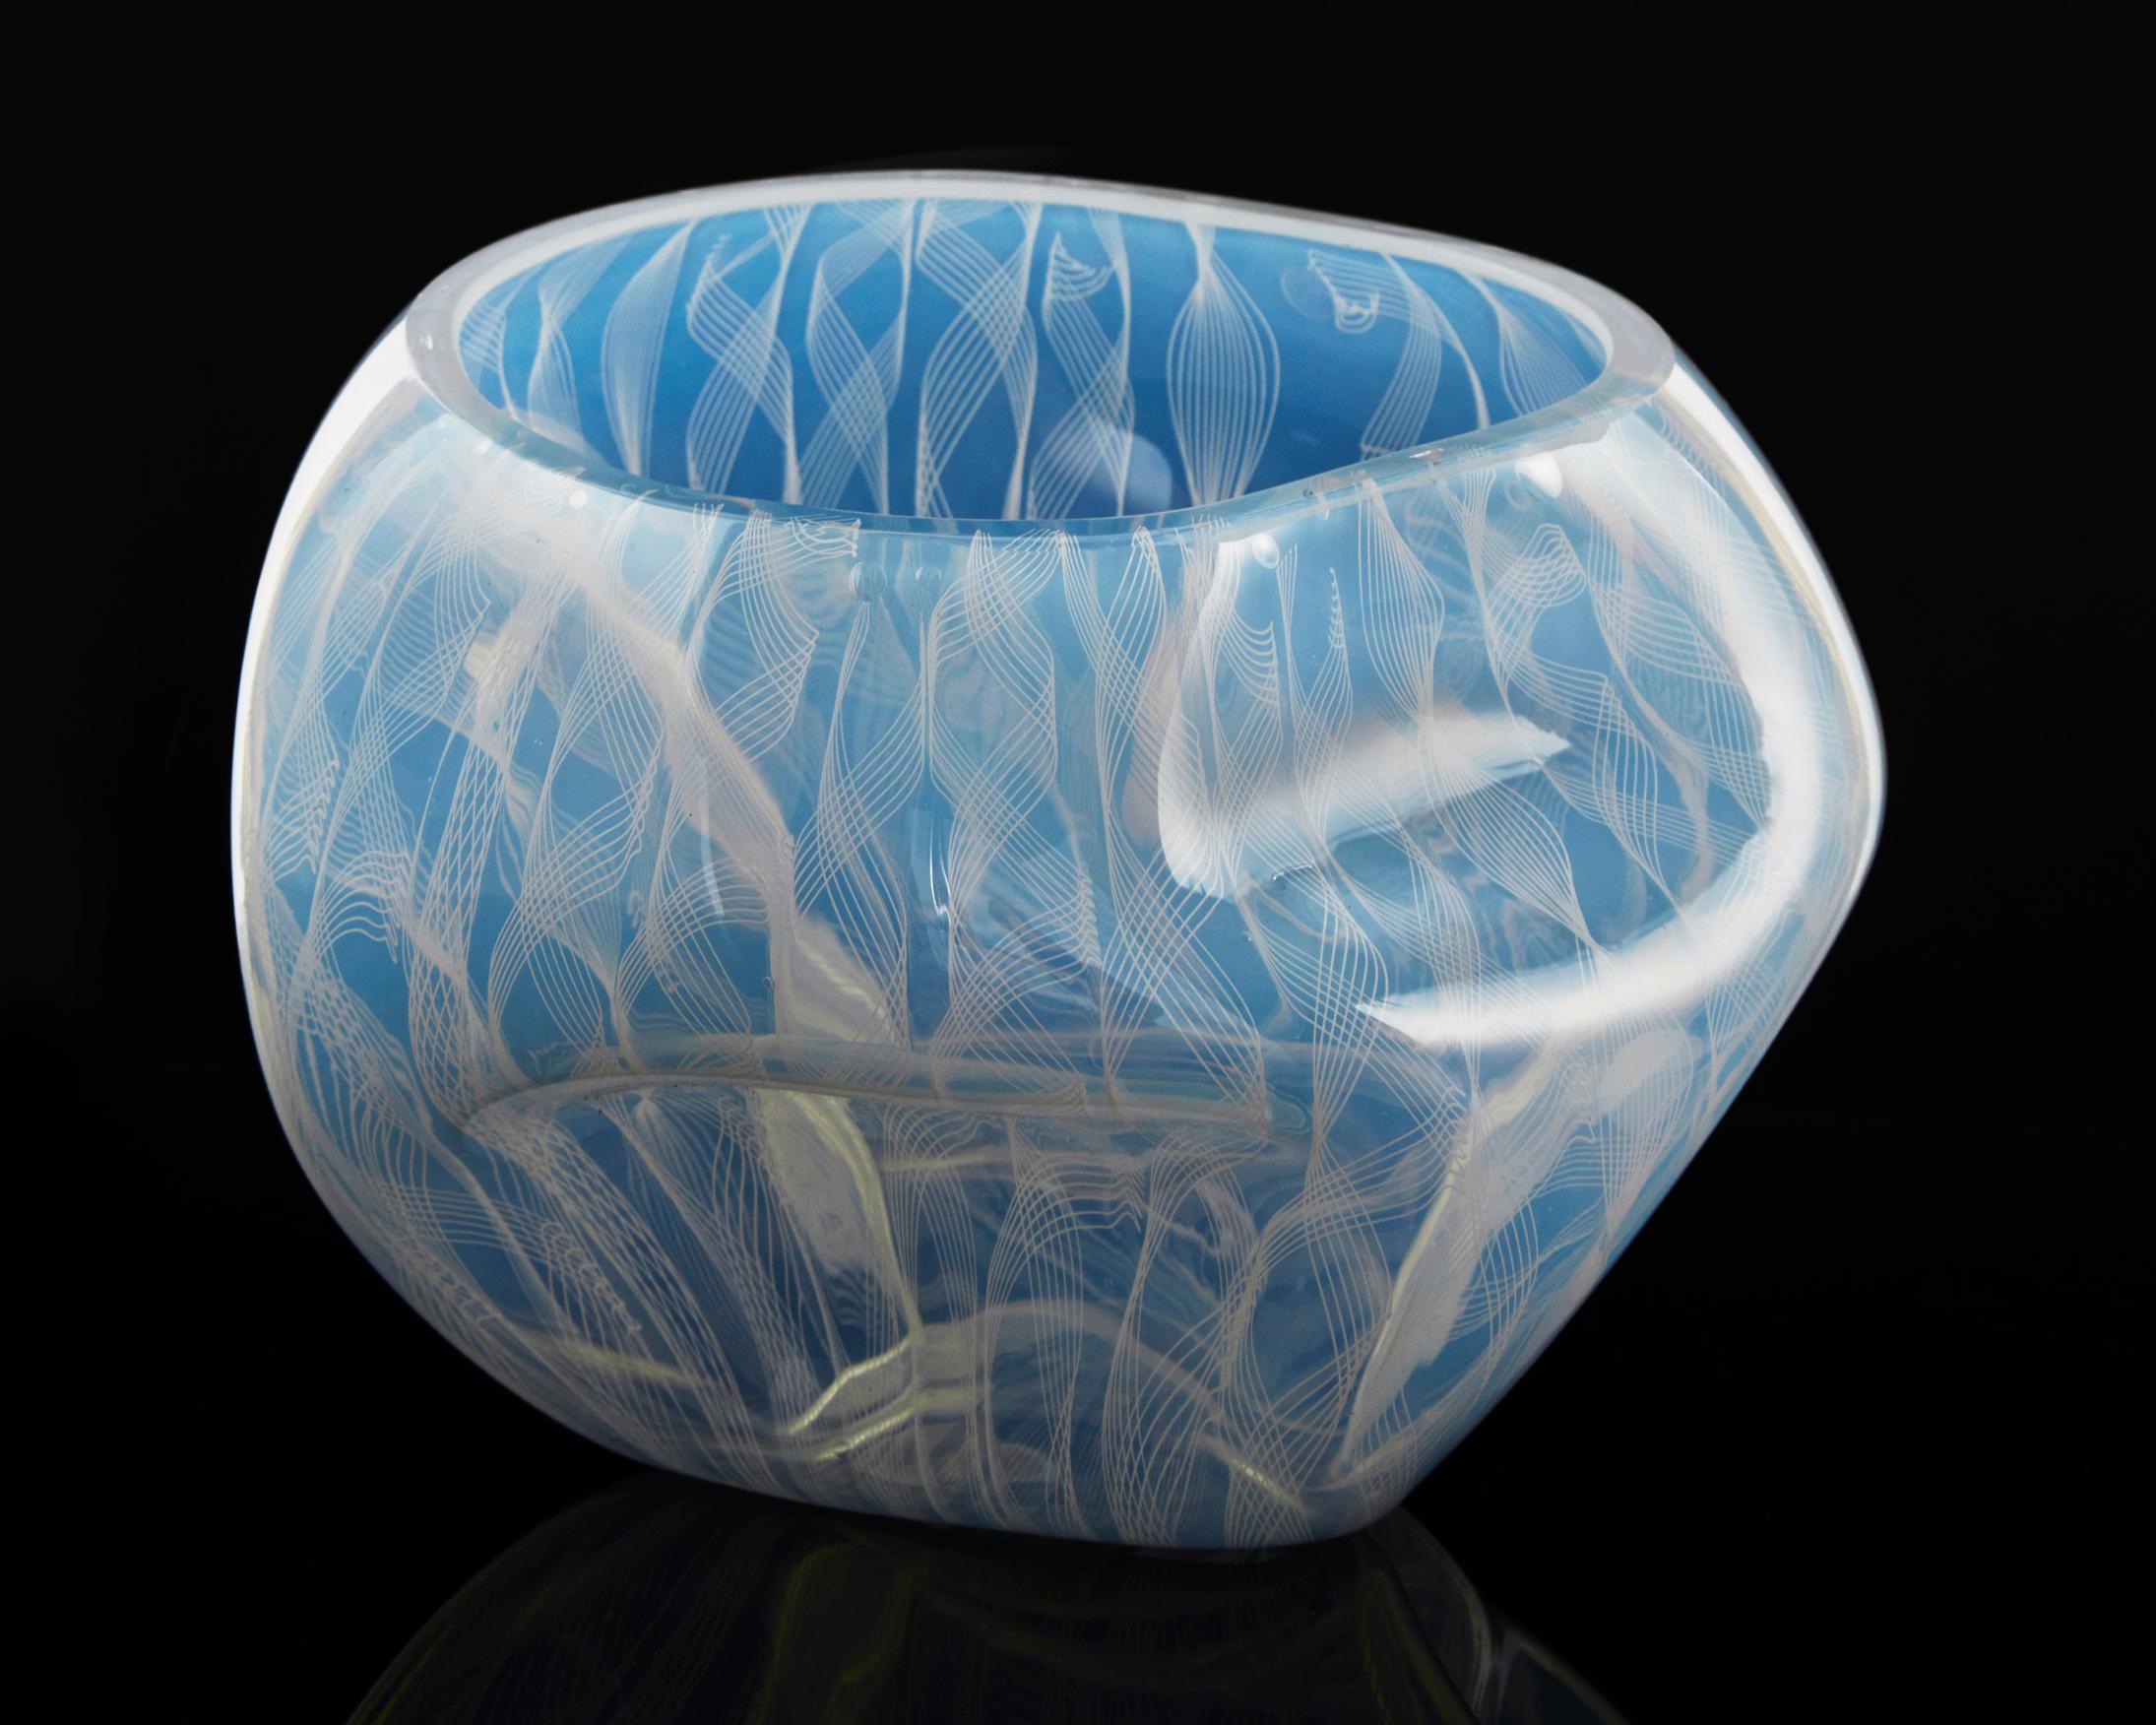 Unique crumpled sculptural vessel in hand-blown filigree glass. Designed and made by Jeff Zimmerman and James Mongrain, USA, 2019.